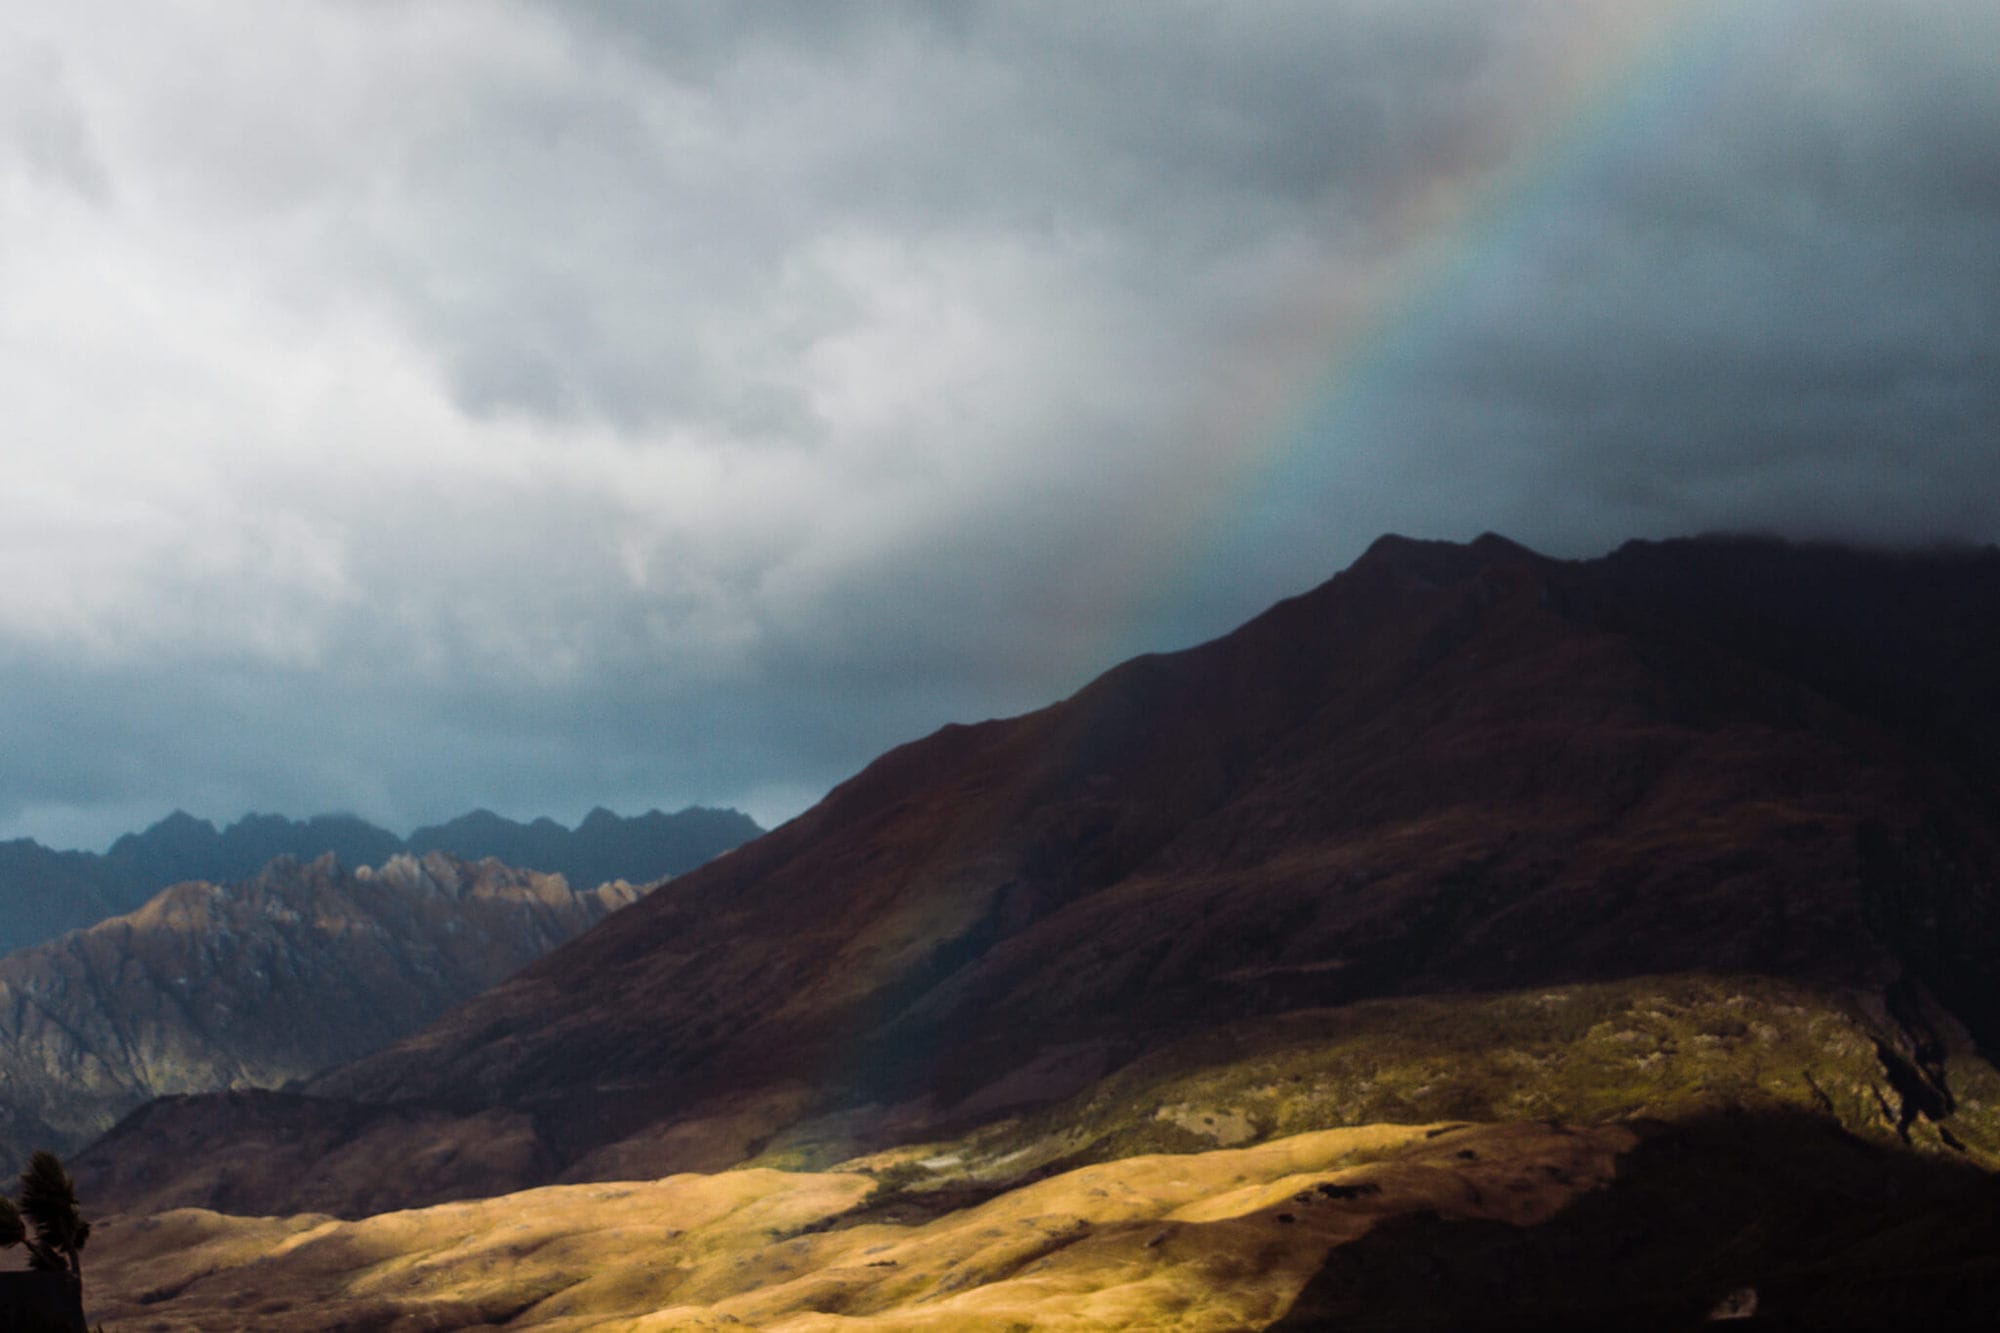 A rainbow appears over the mountains of New Zealand's South island. The sun exposes patches of yellow grass on the hillside.